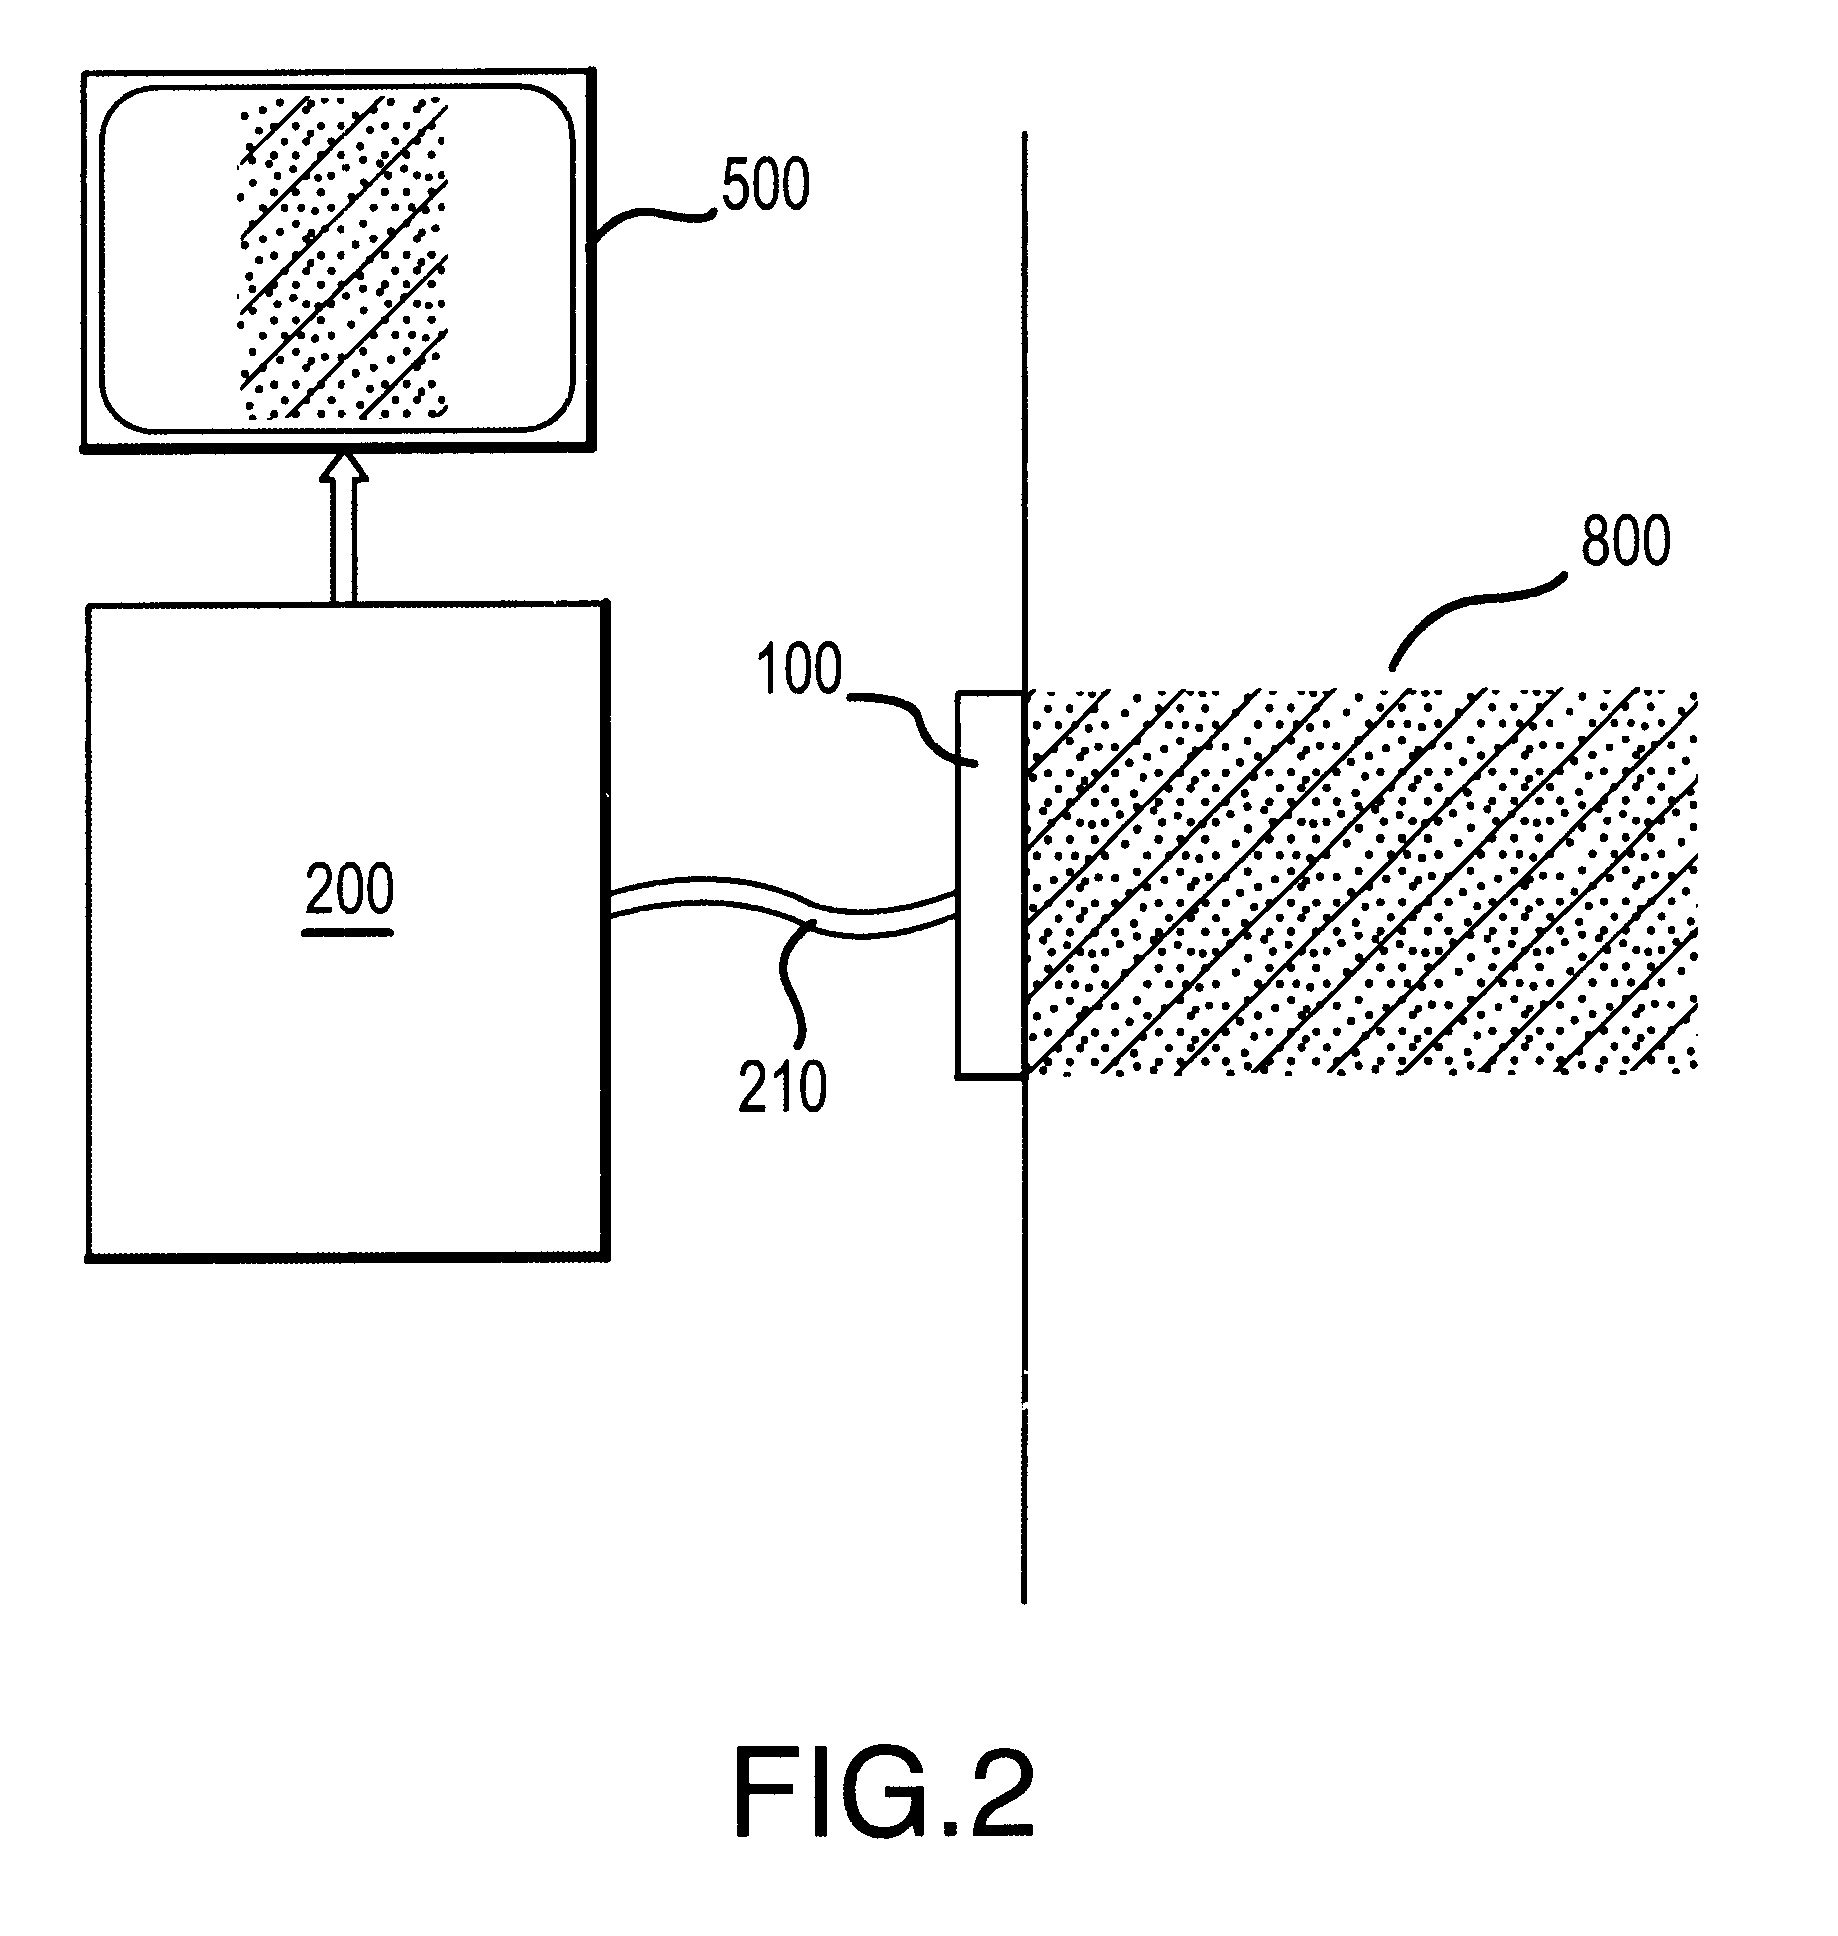 Imaging, therapy, and temperature monitoring ultrasonic system